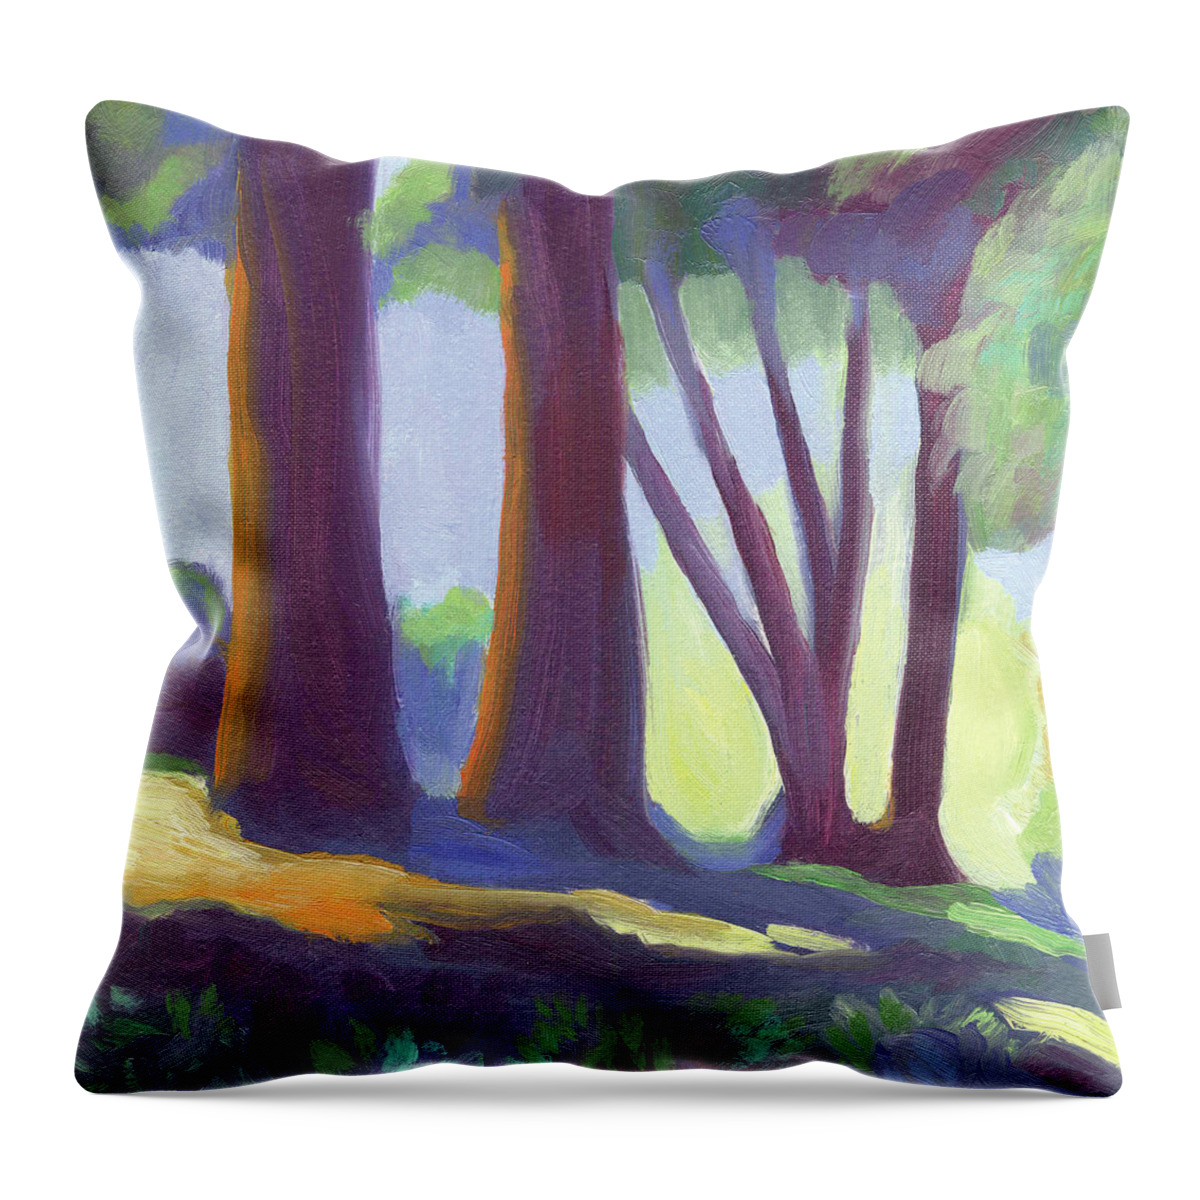 Codornices Throw Pillow featuring the painting Codornices Park by Linda Ruiz-Lozito